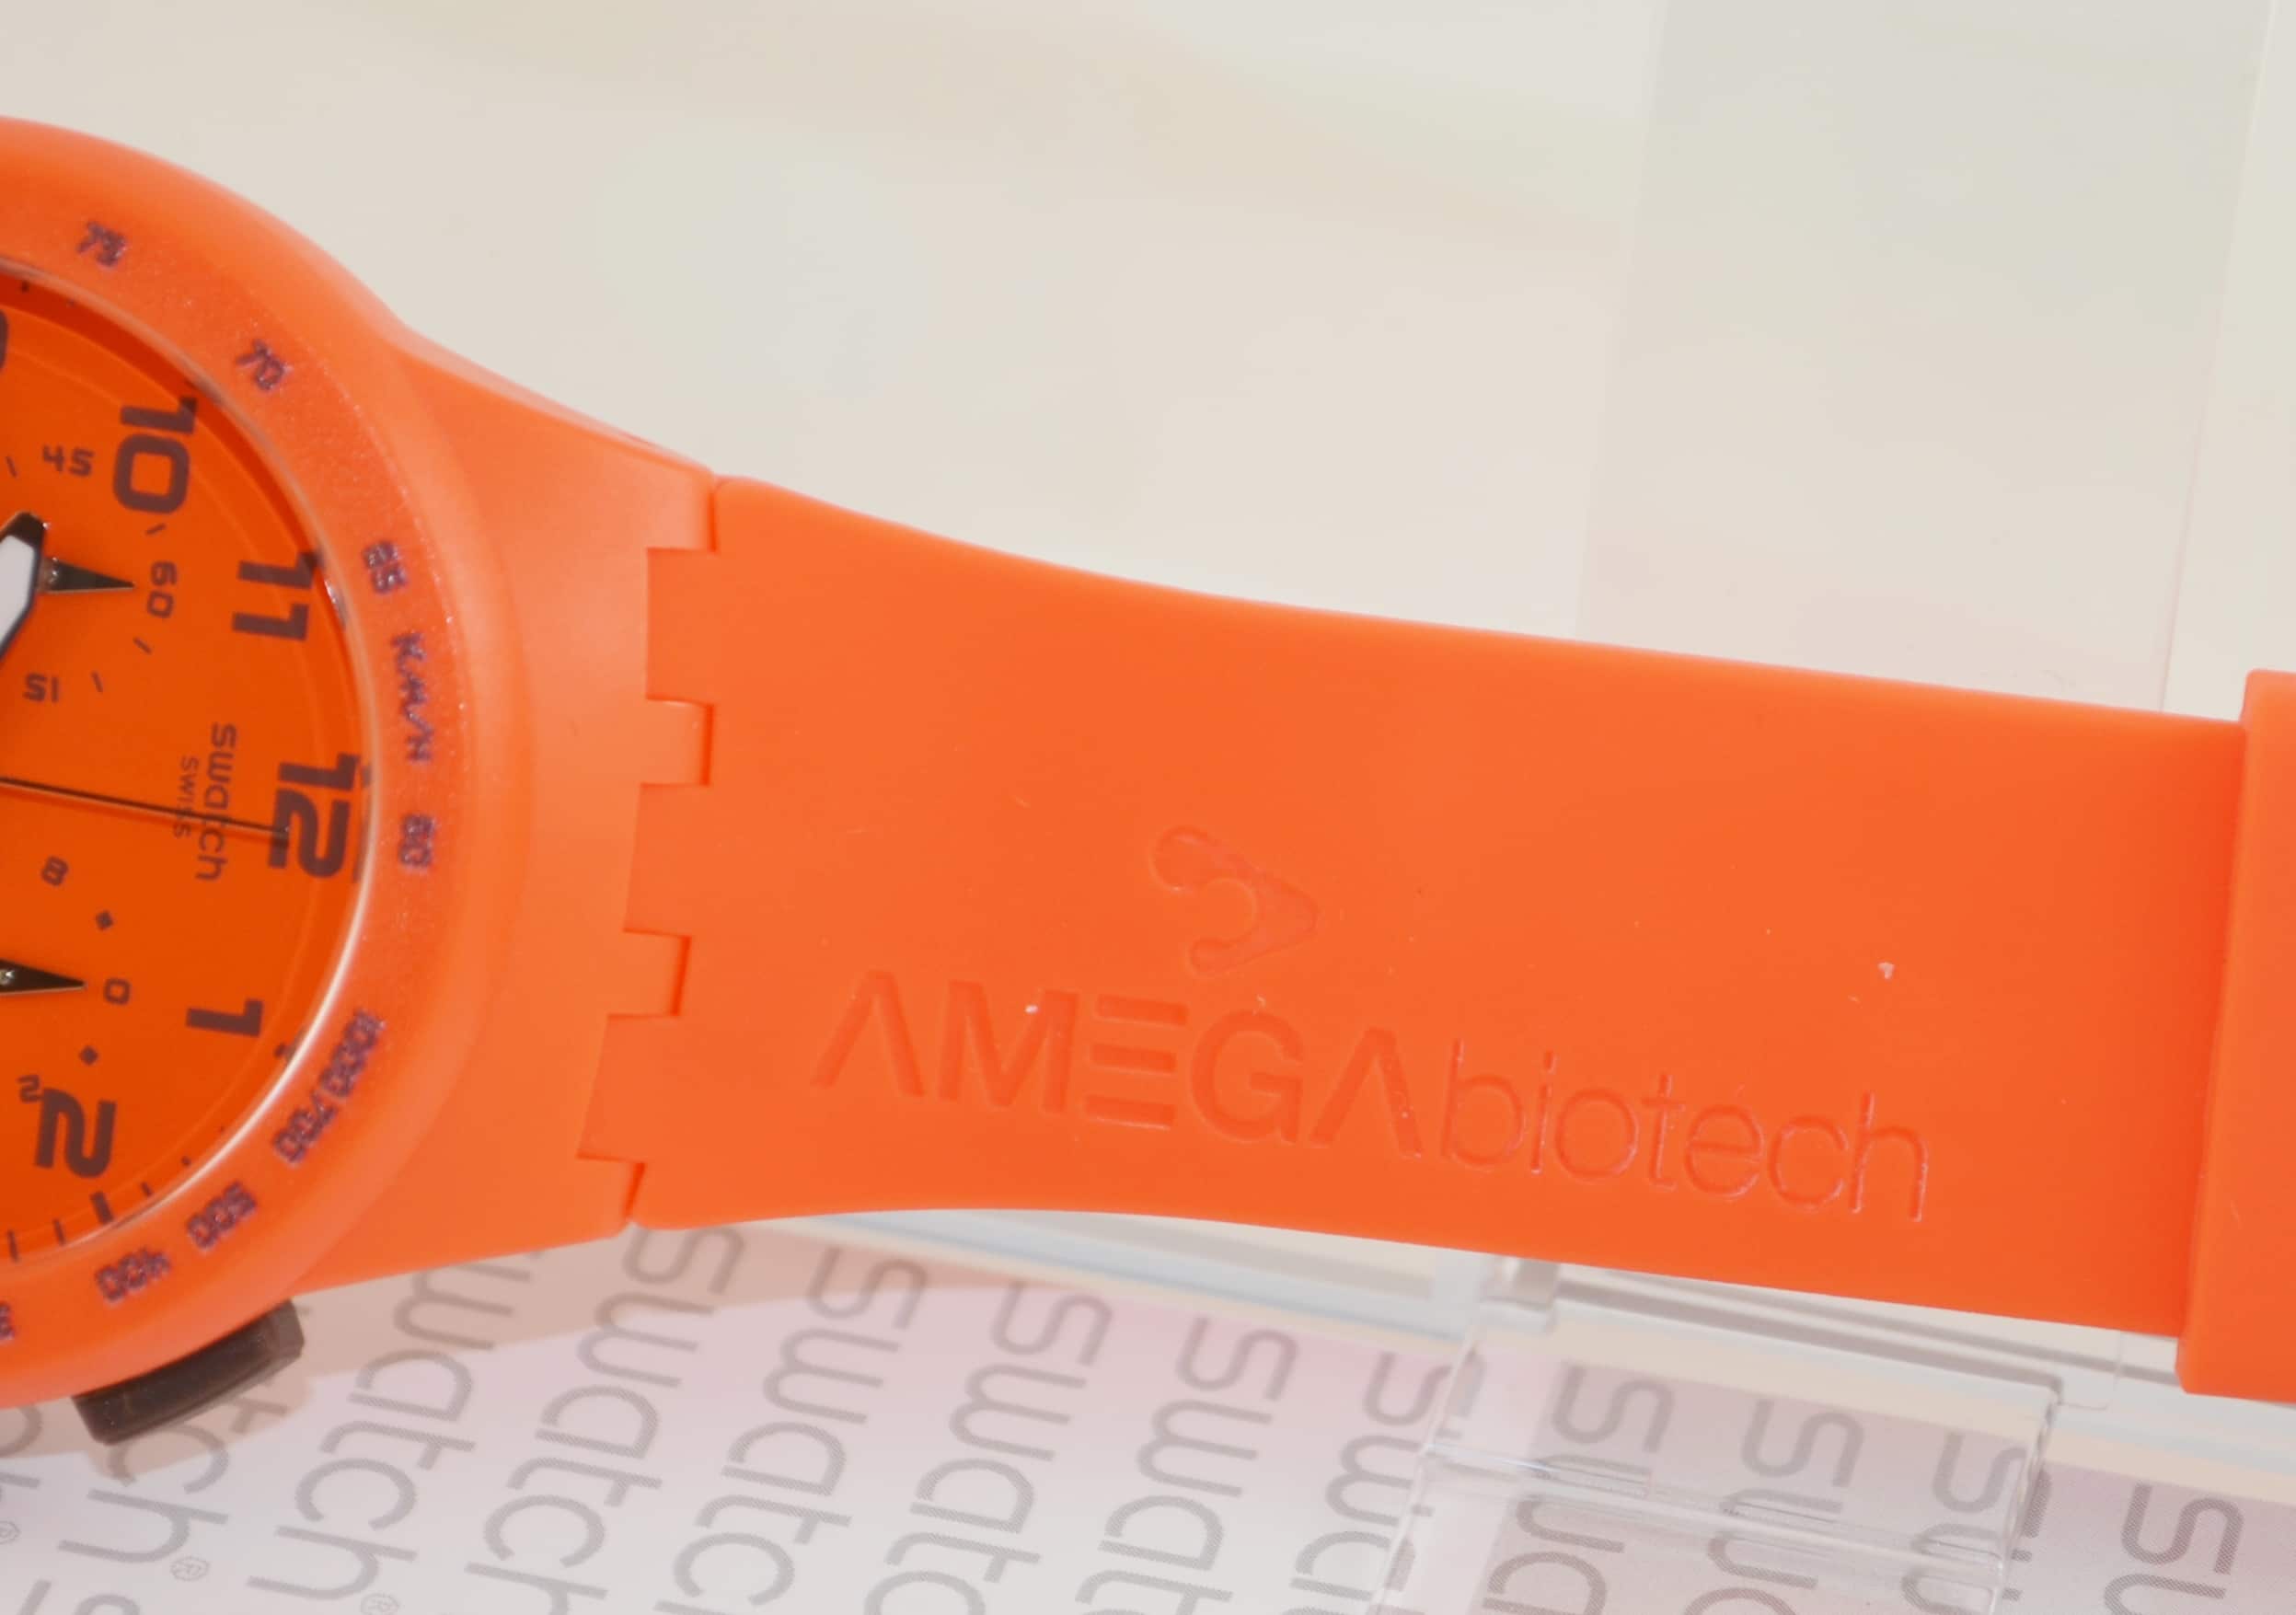 Swatch Watch Wristband Laser Engraved By Accubeam Laser in Sarasota, Florida.